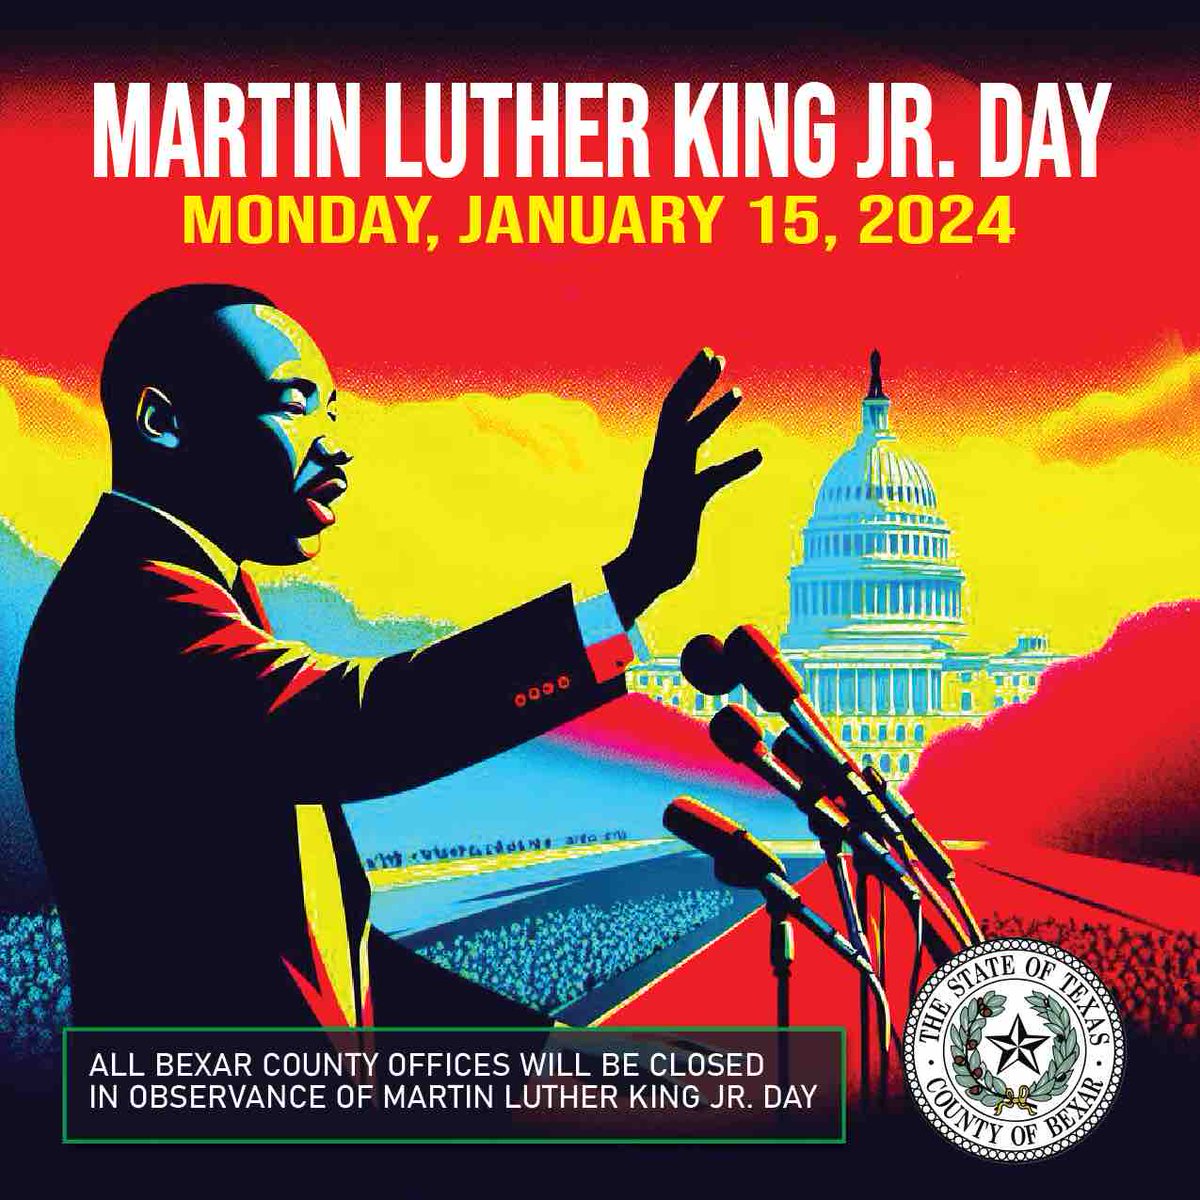 All Bexar County offices will be closed in observance of Martin Luther King Jr. Day.